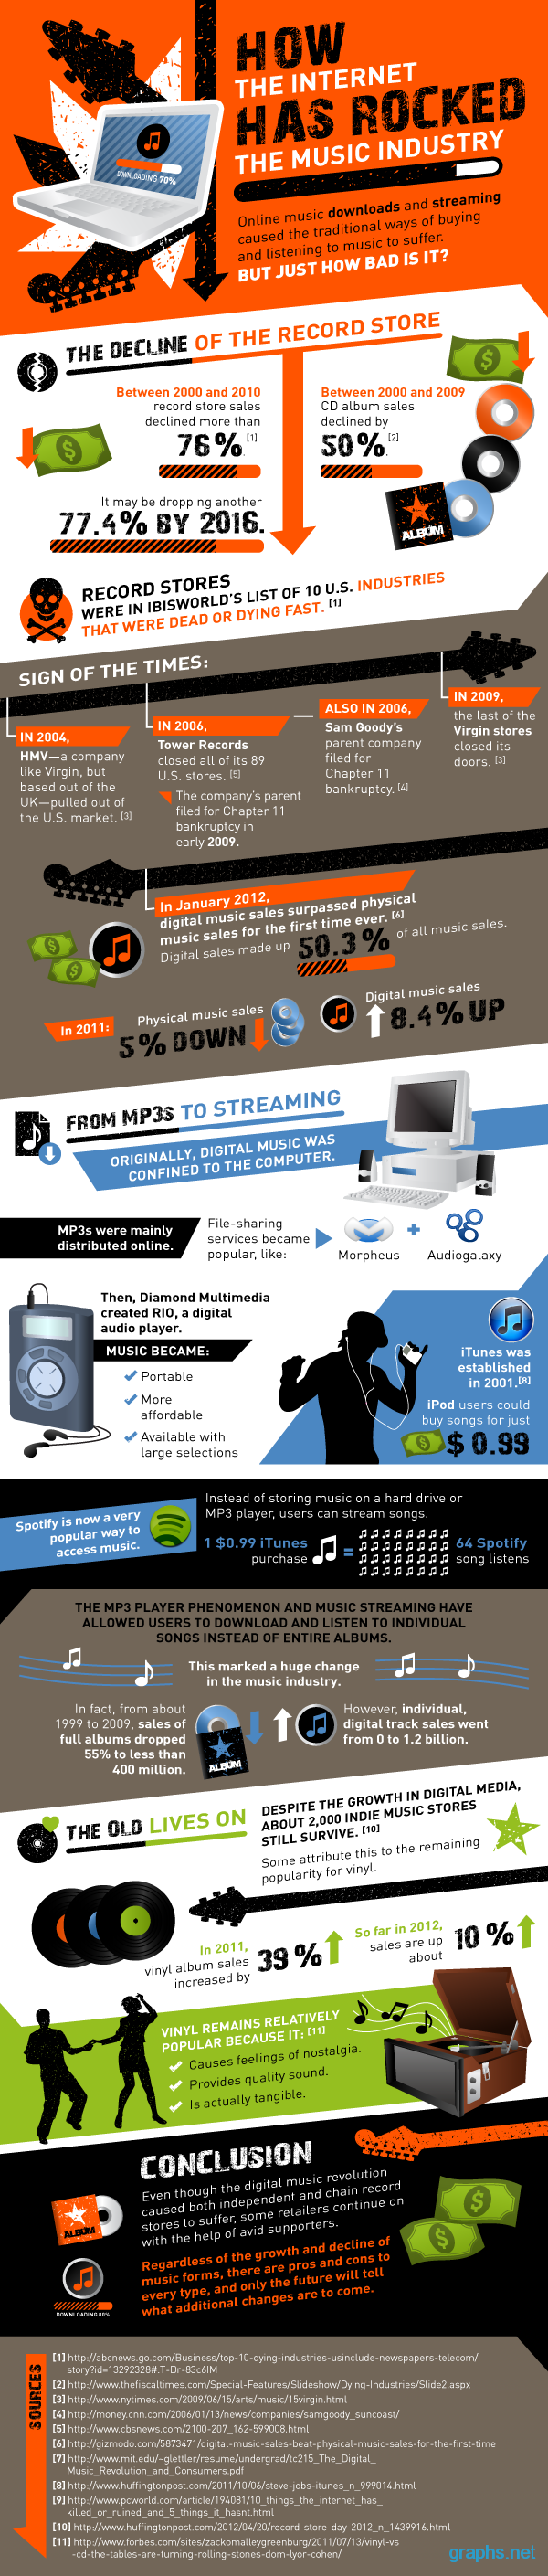 Internet Influence on Music Industry